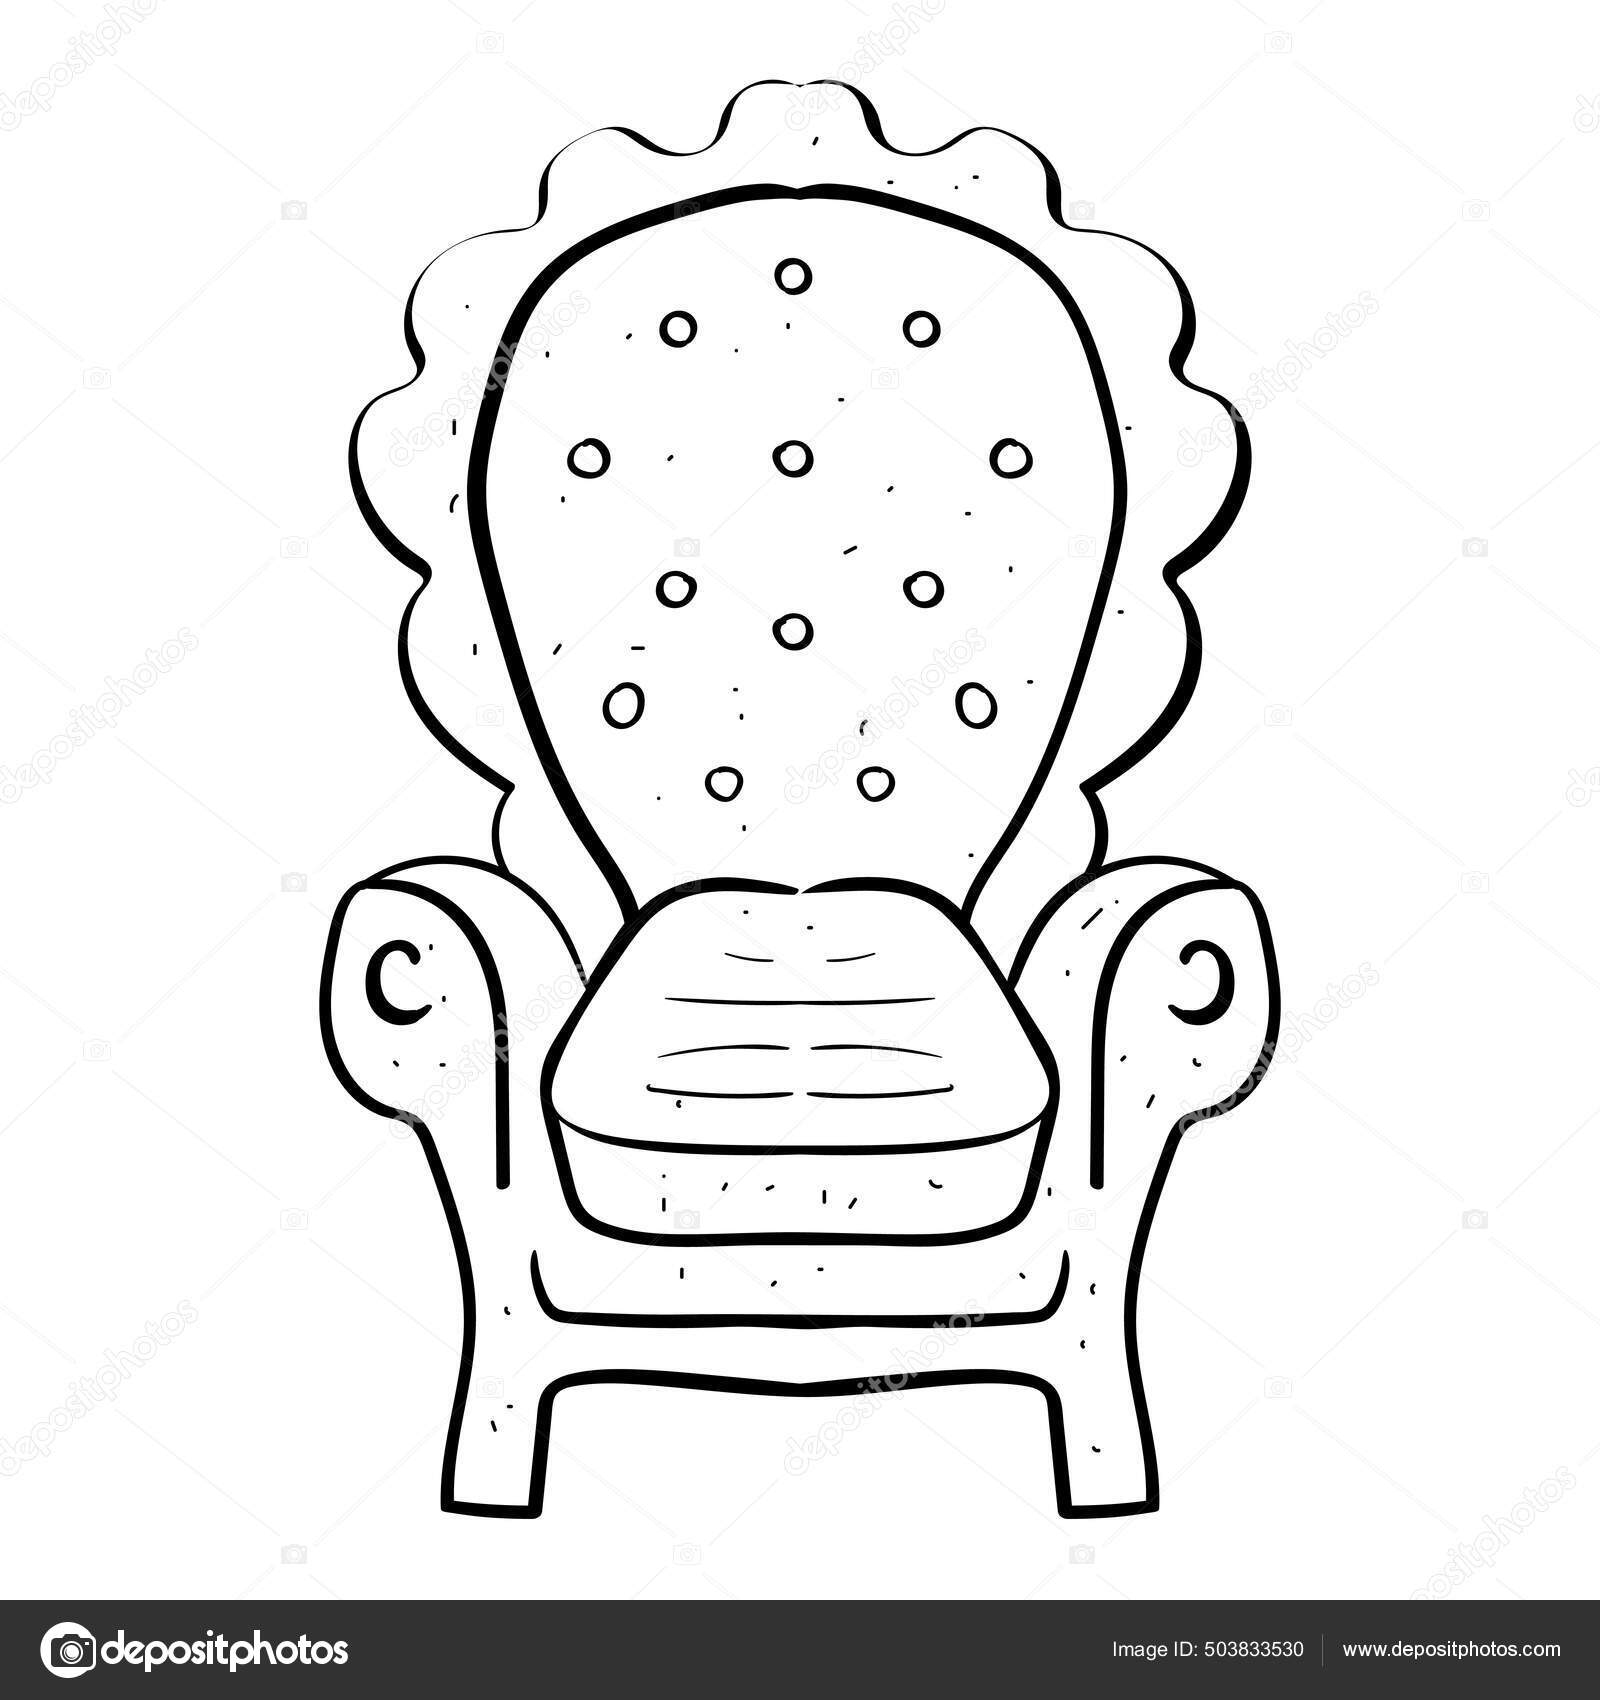 Fabulous Throne King Queen Cartoon Coloring Vector Illustration Stock  Vector by ©meiyuan.china.gmail.com 503833530